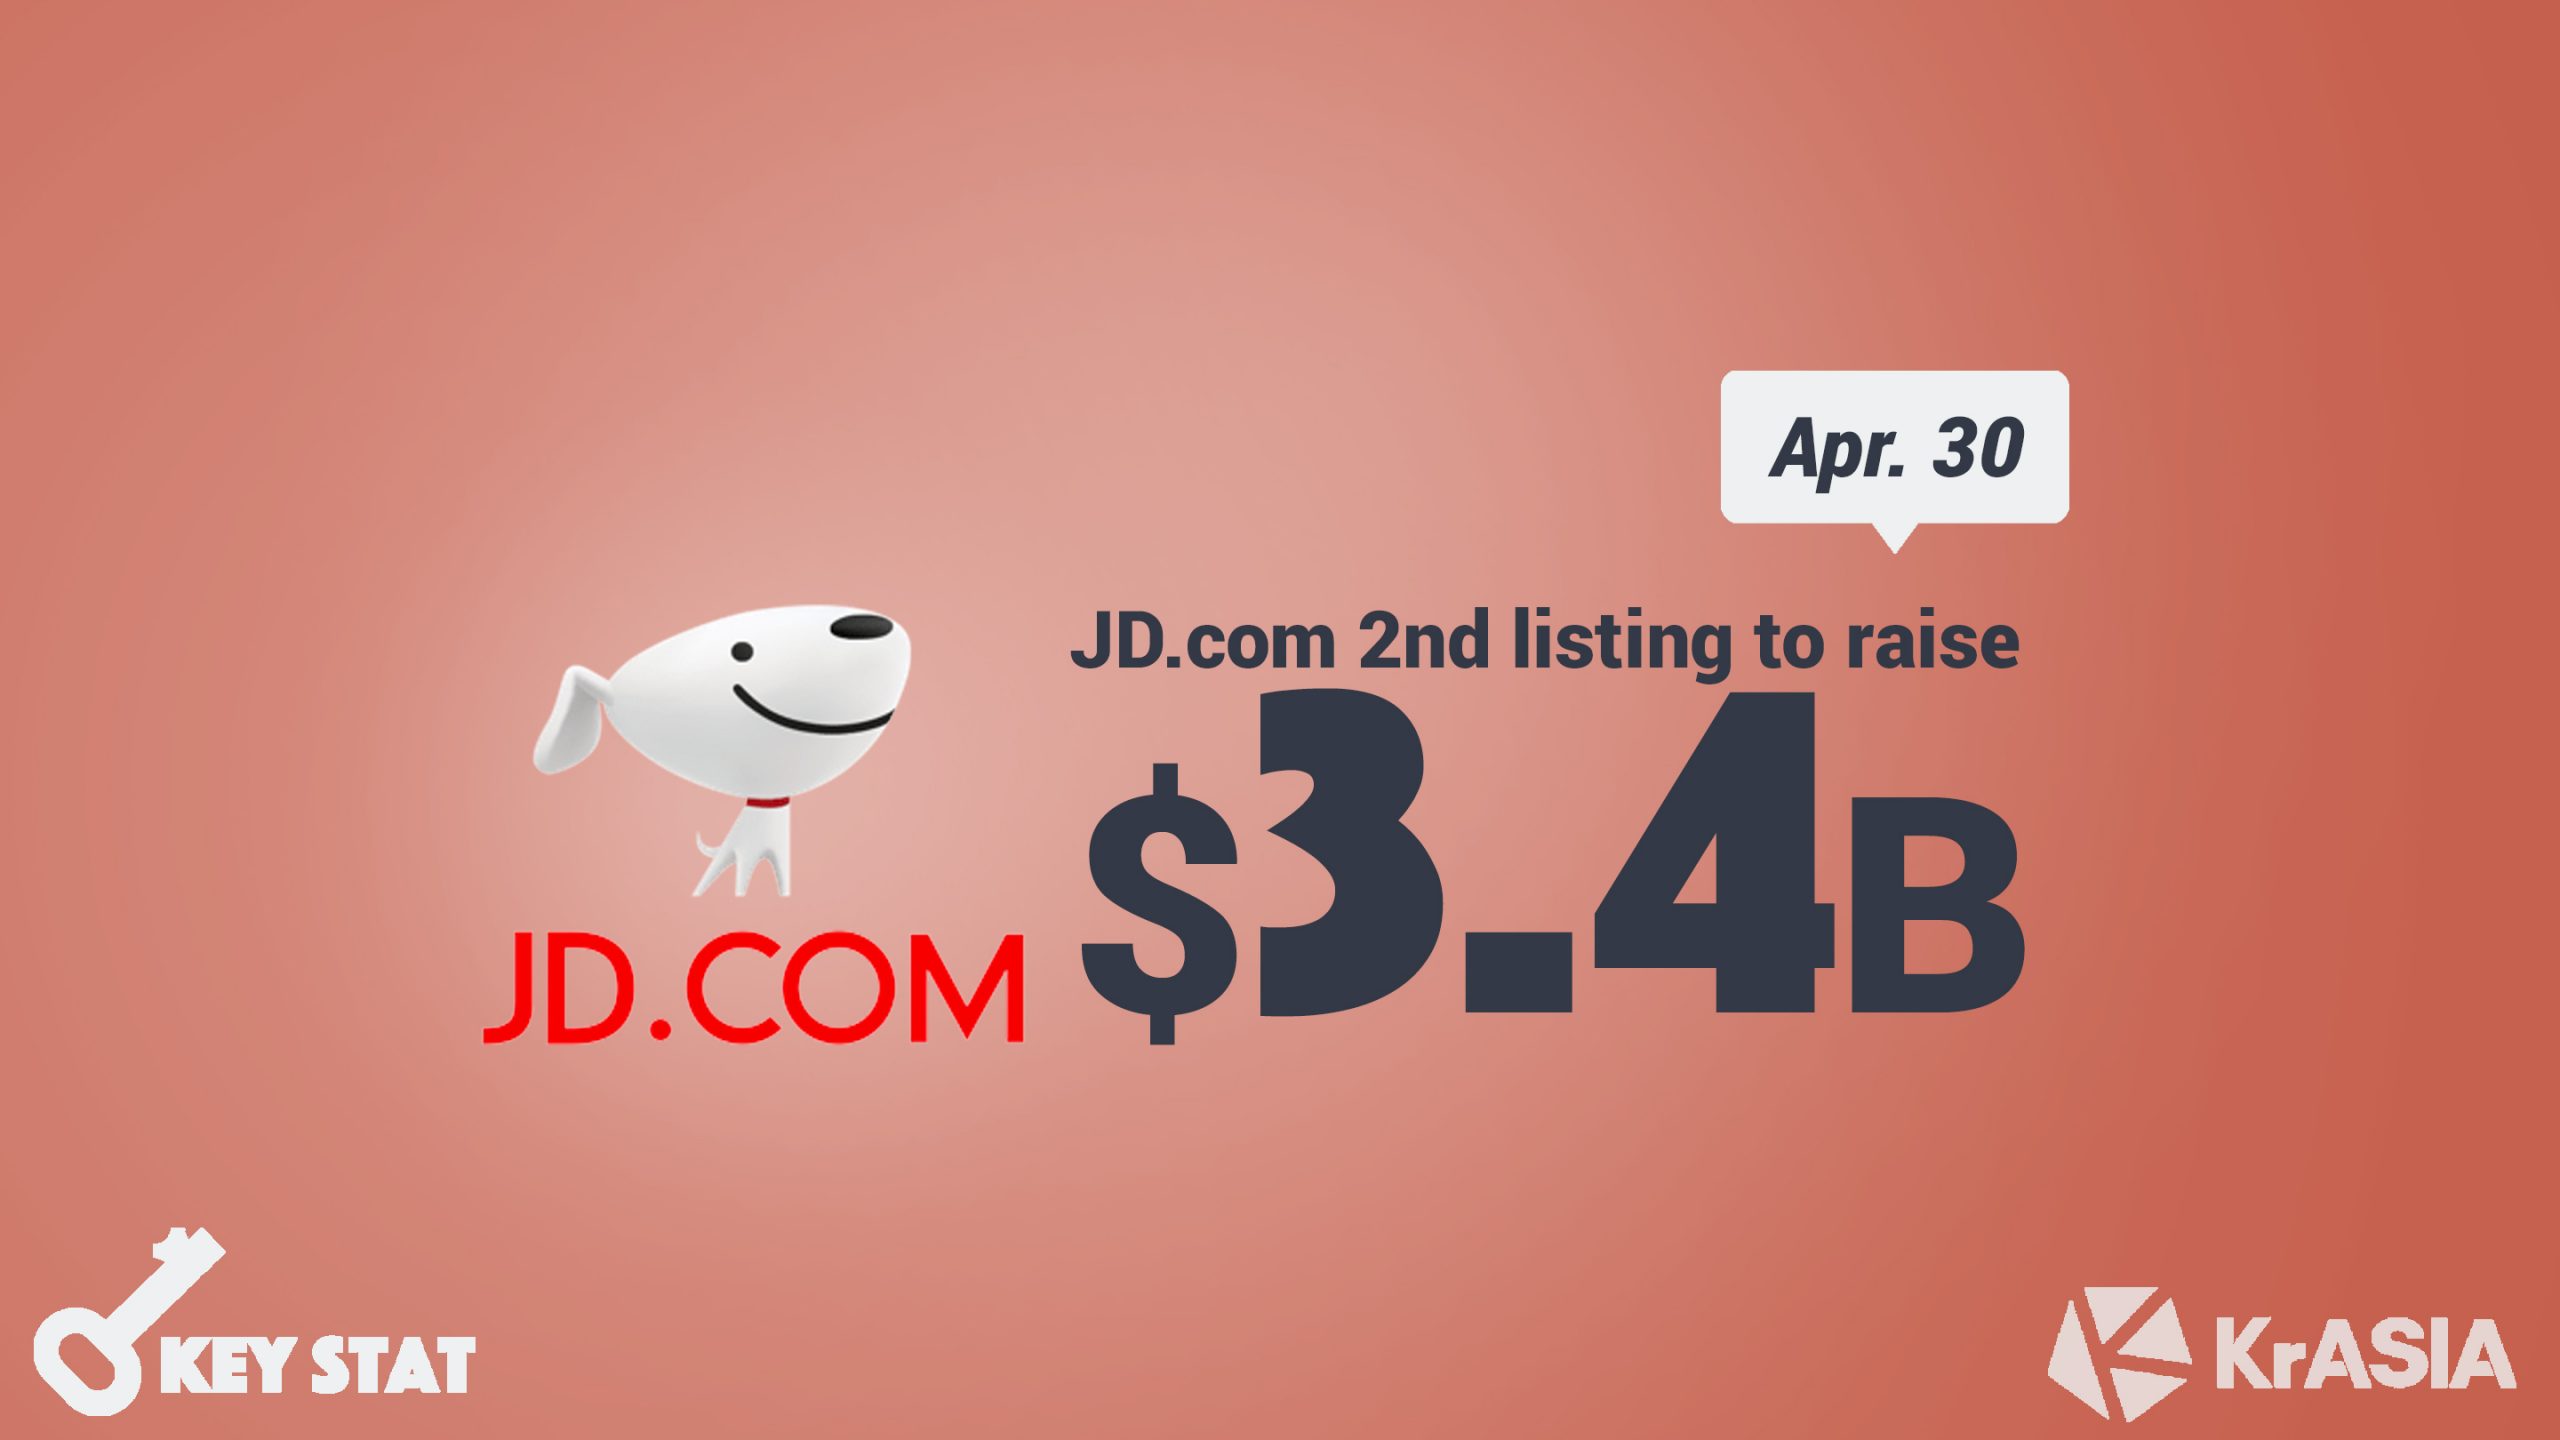 KEY STAT | JD.com plans for secondary listing in Hong Kong as US-listed Chinese stocks face increased scrutiny